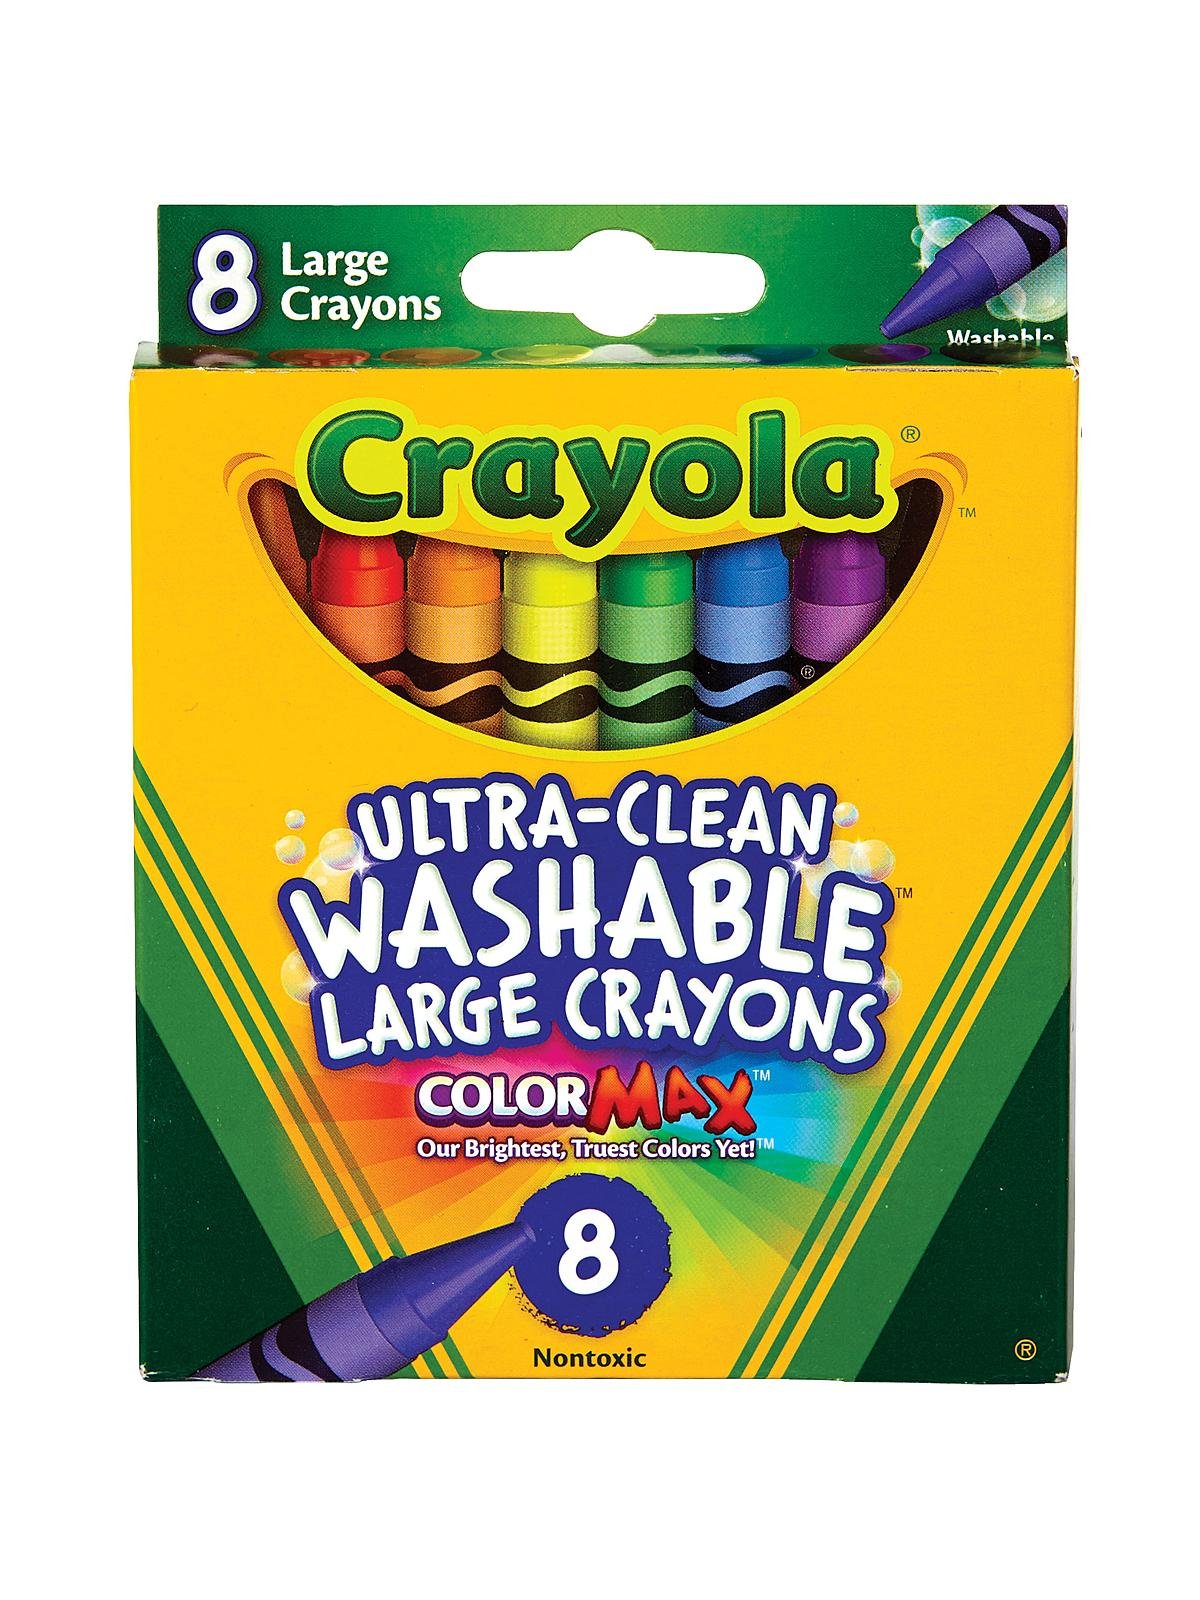 Crayola - Ultra-clean Washable Large Crayons